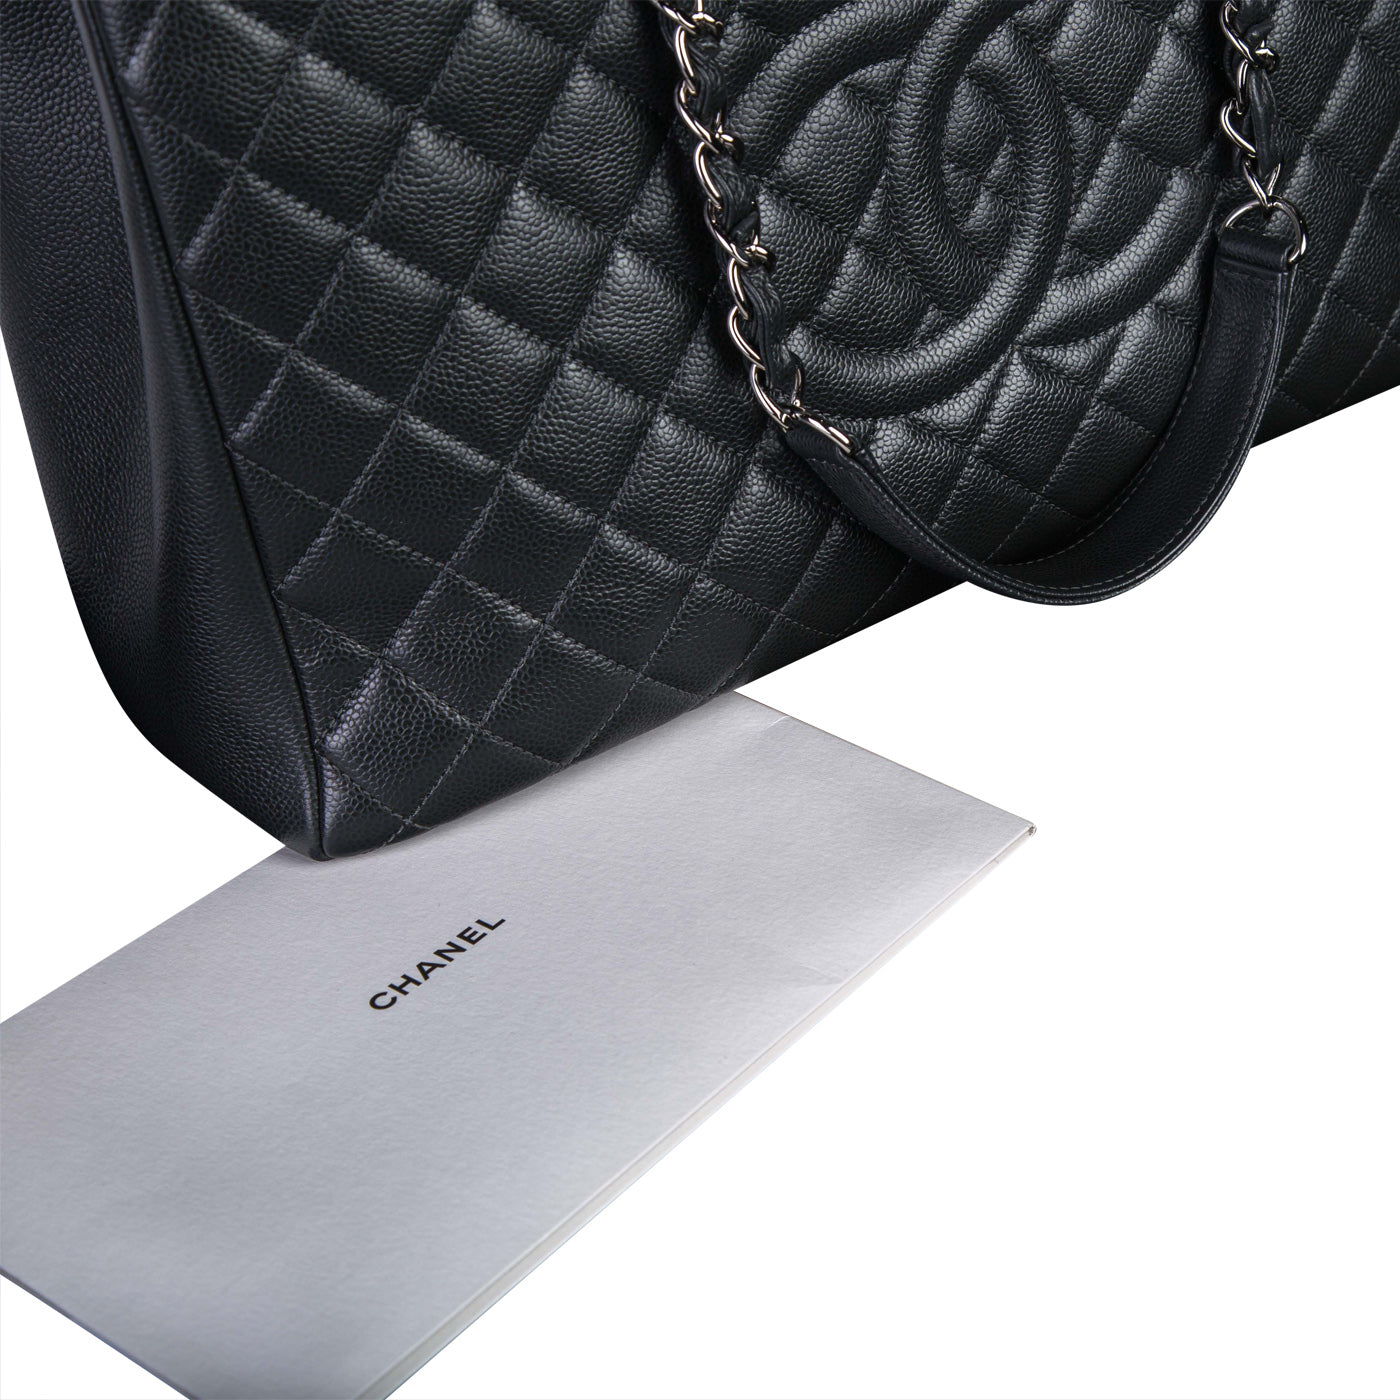 review CHANEL GST XL (Grand Shopping Tote XL) 